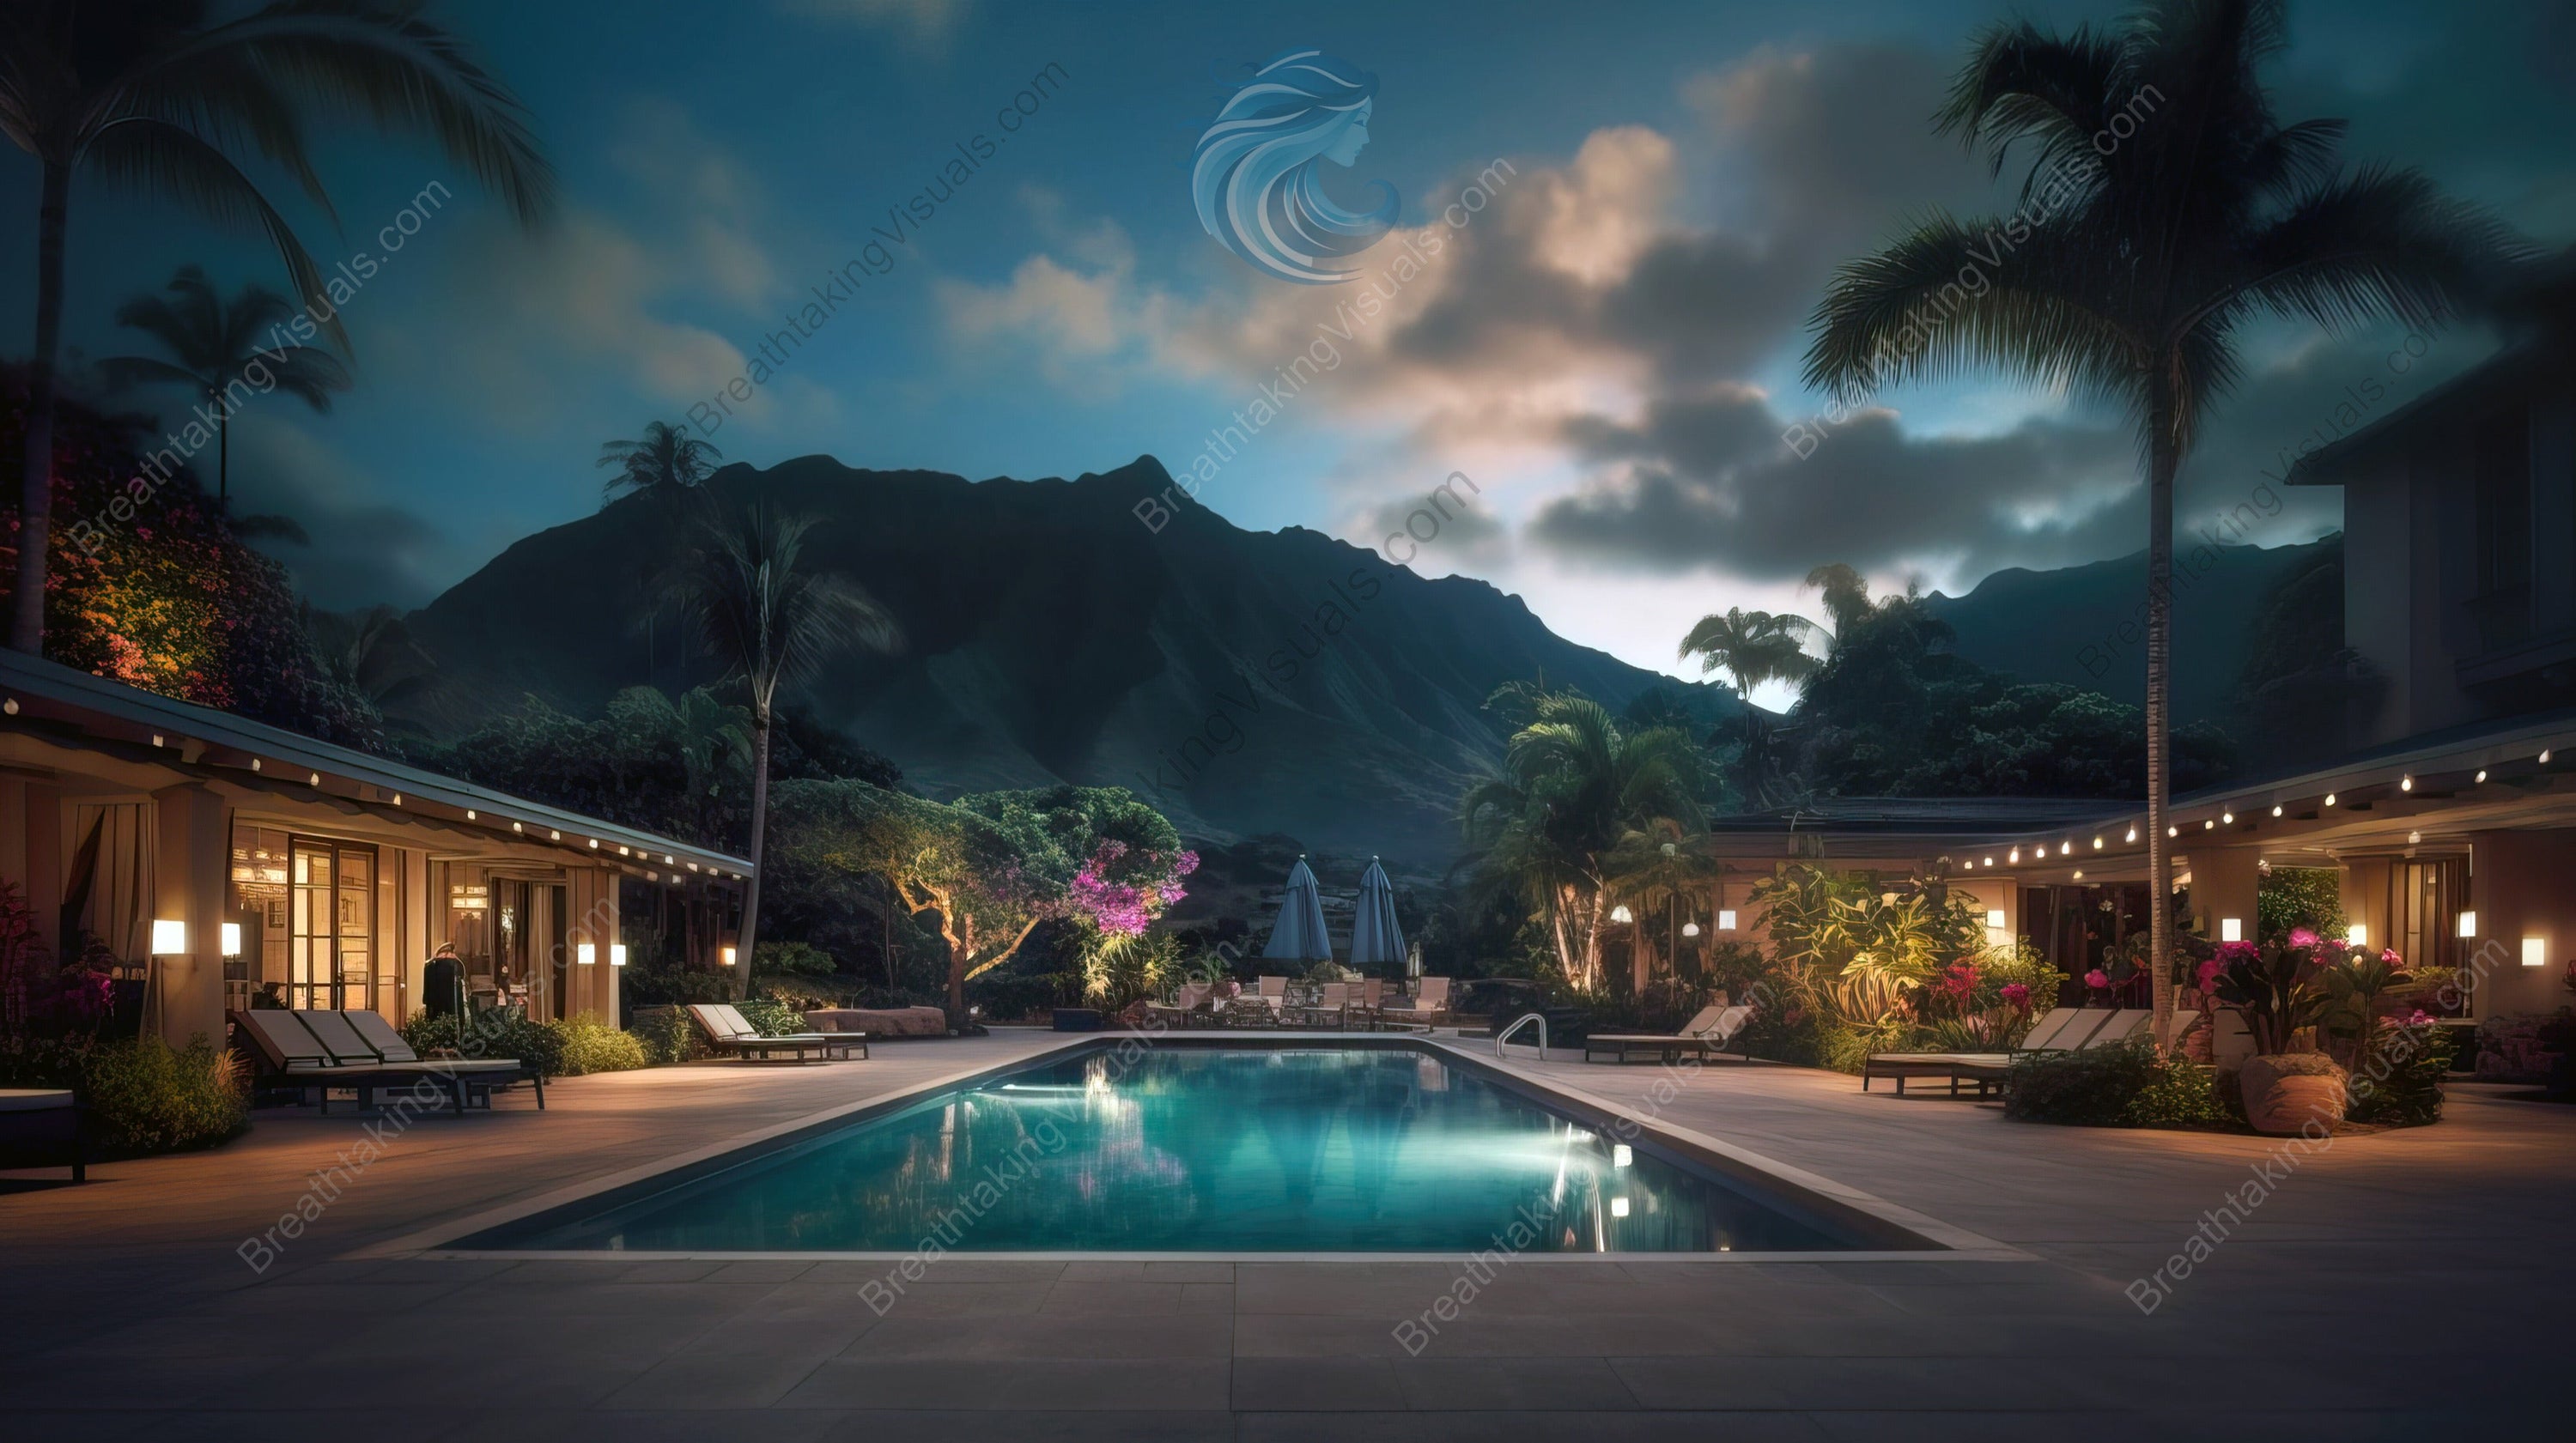 Luxurious Resort Evening Poolside View with Mountains